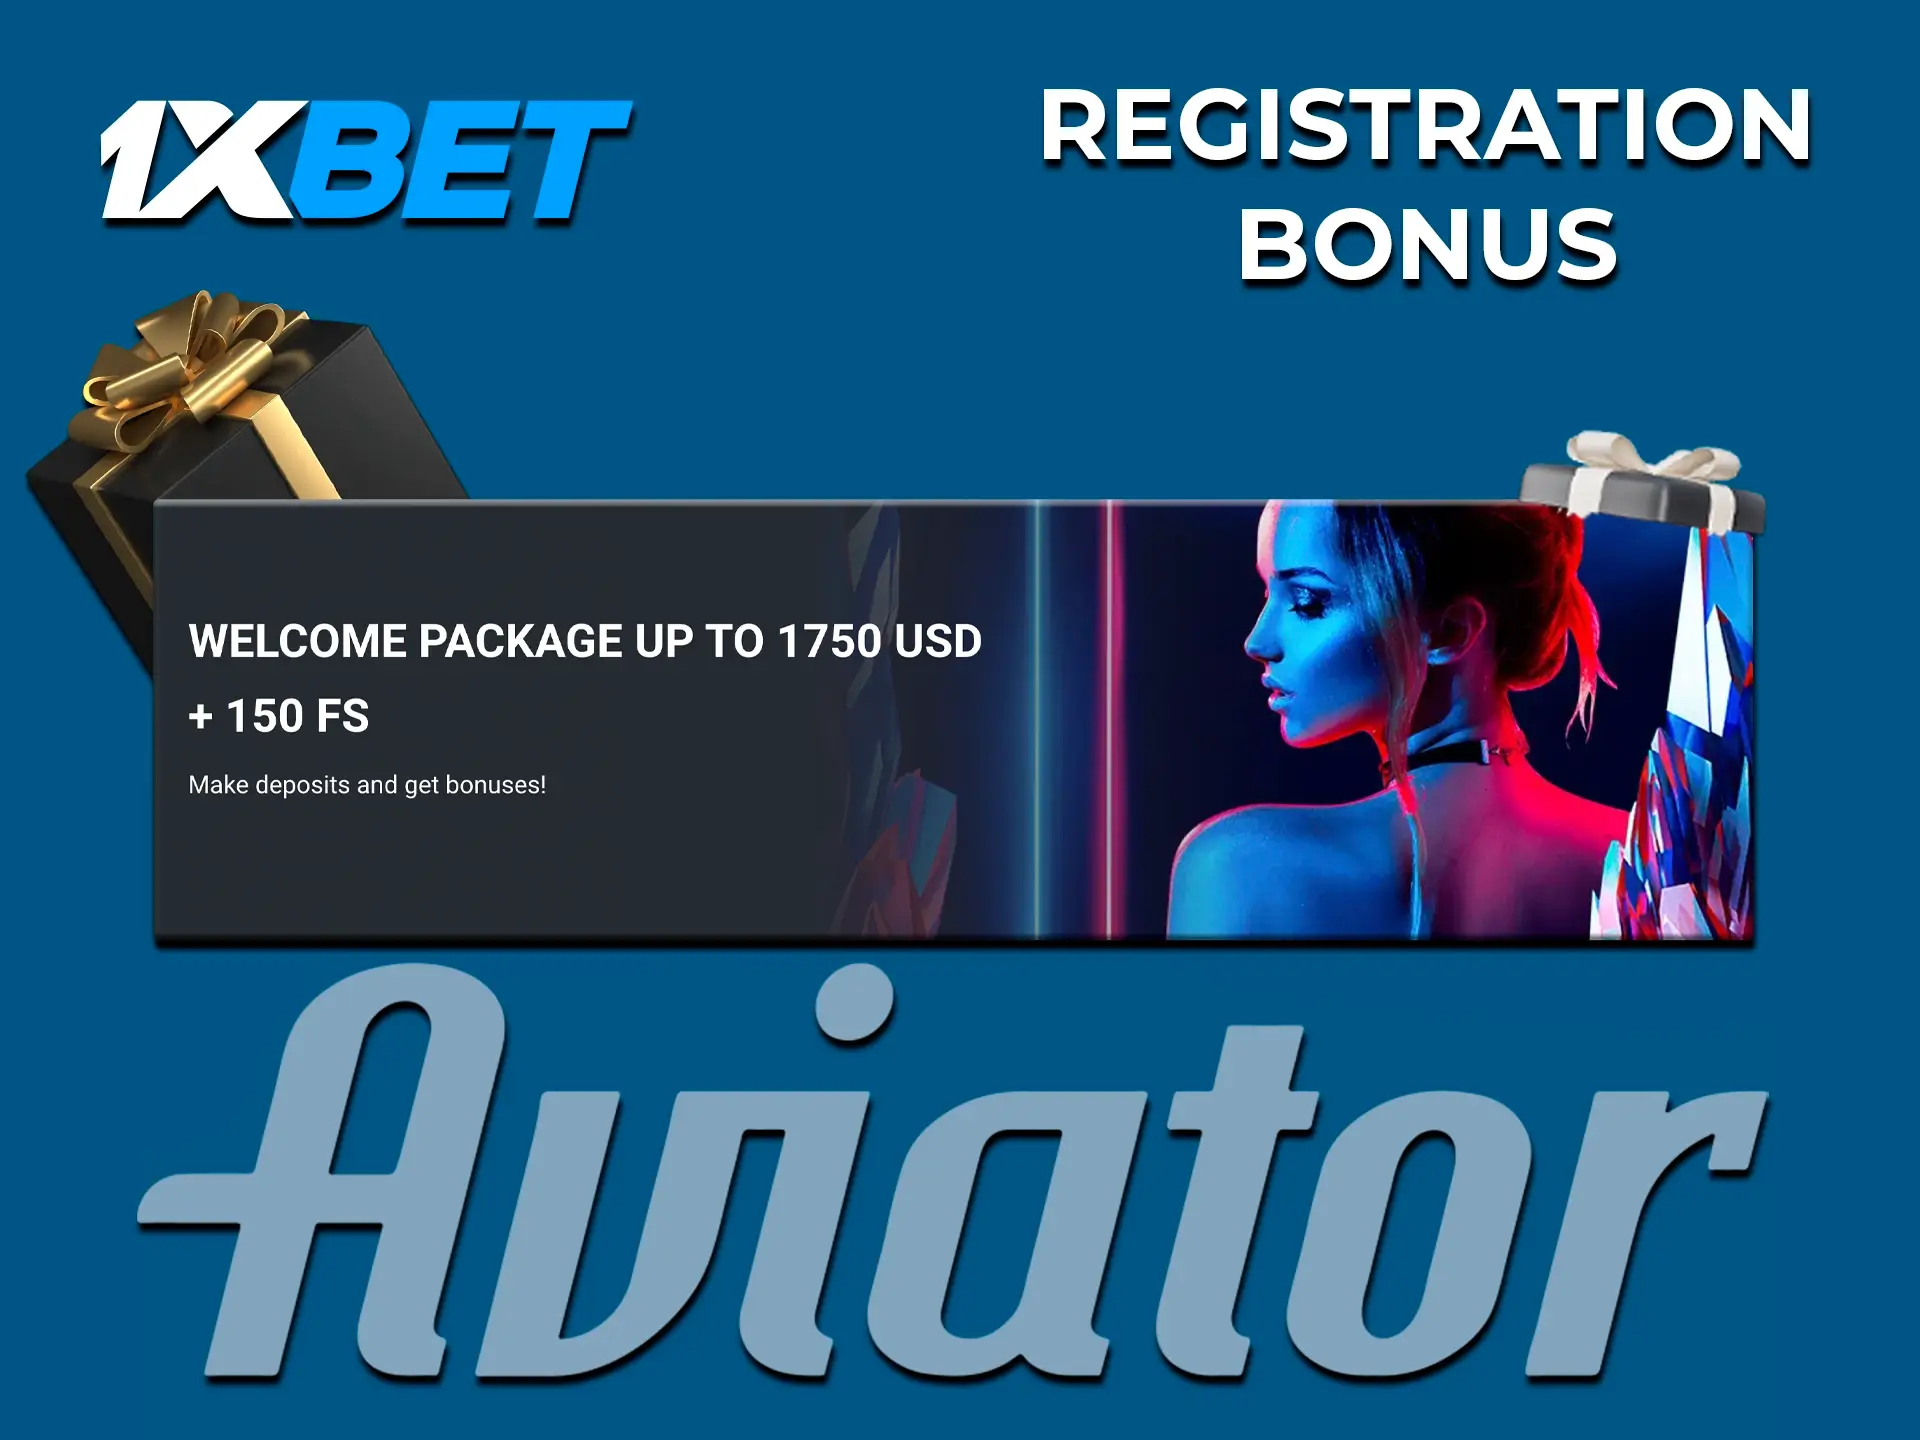 A superb bonus from 1xBet casino will give you great opportunities to make money and win big.